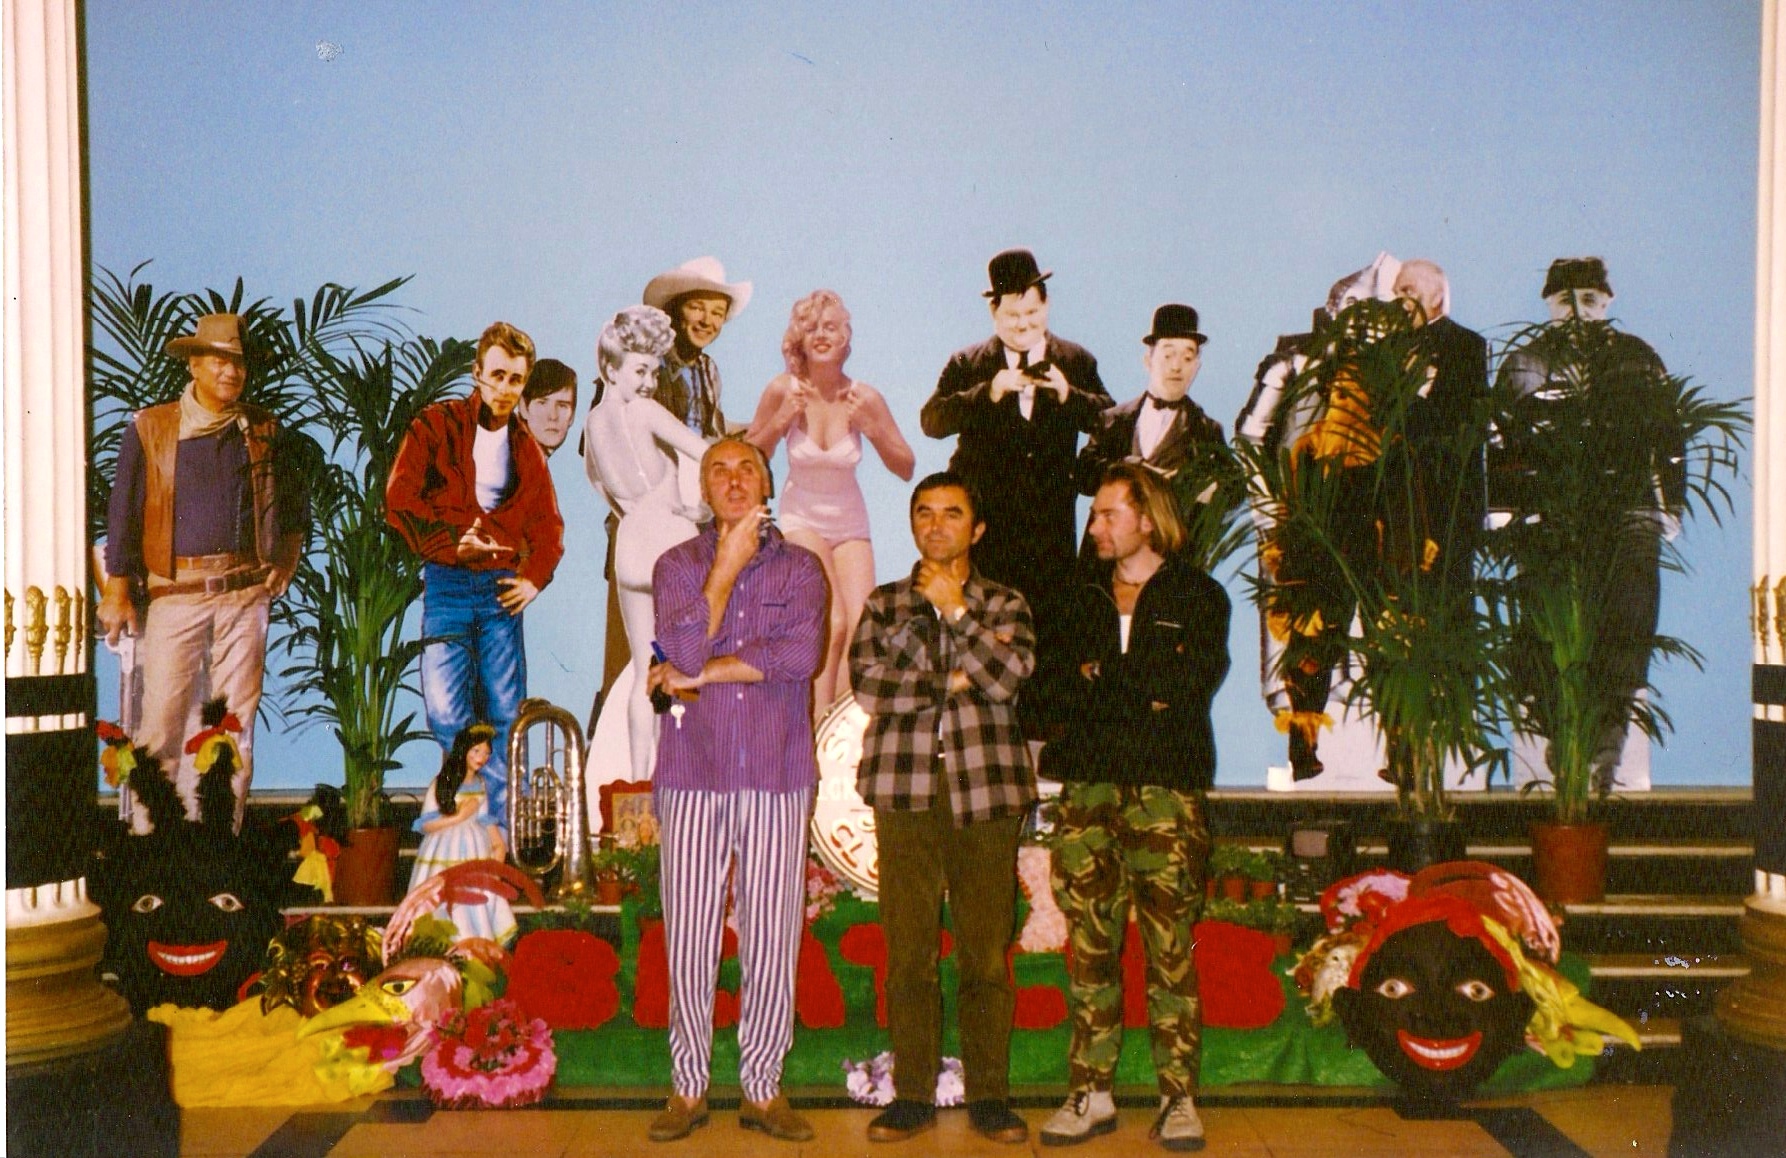 FREE AS A BIRD : SGT. PEPPER'S LONELY HEARTS CLUB ALBUM COVER RECREATION IN ADELPHI HOTEL.